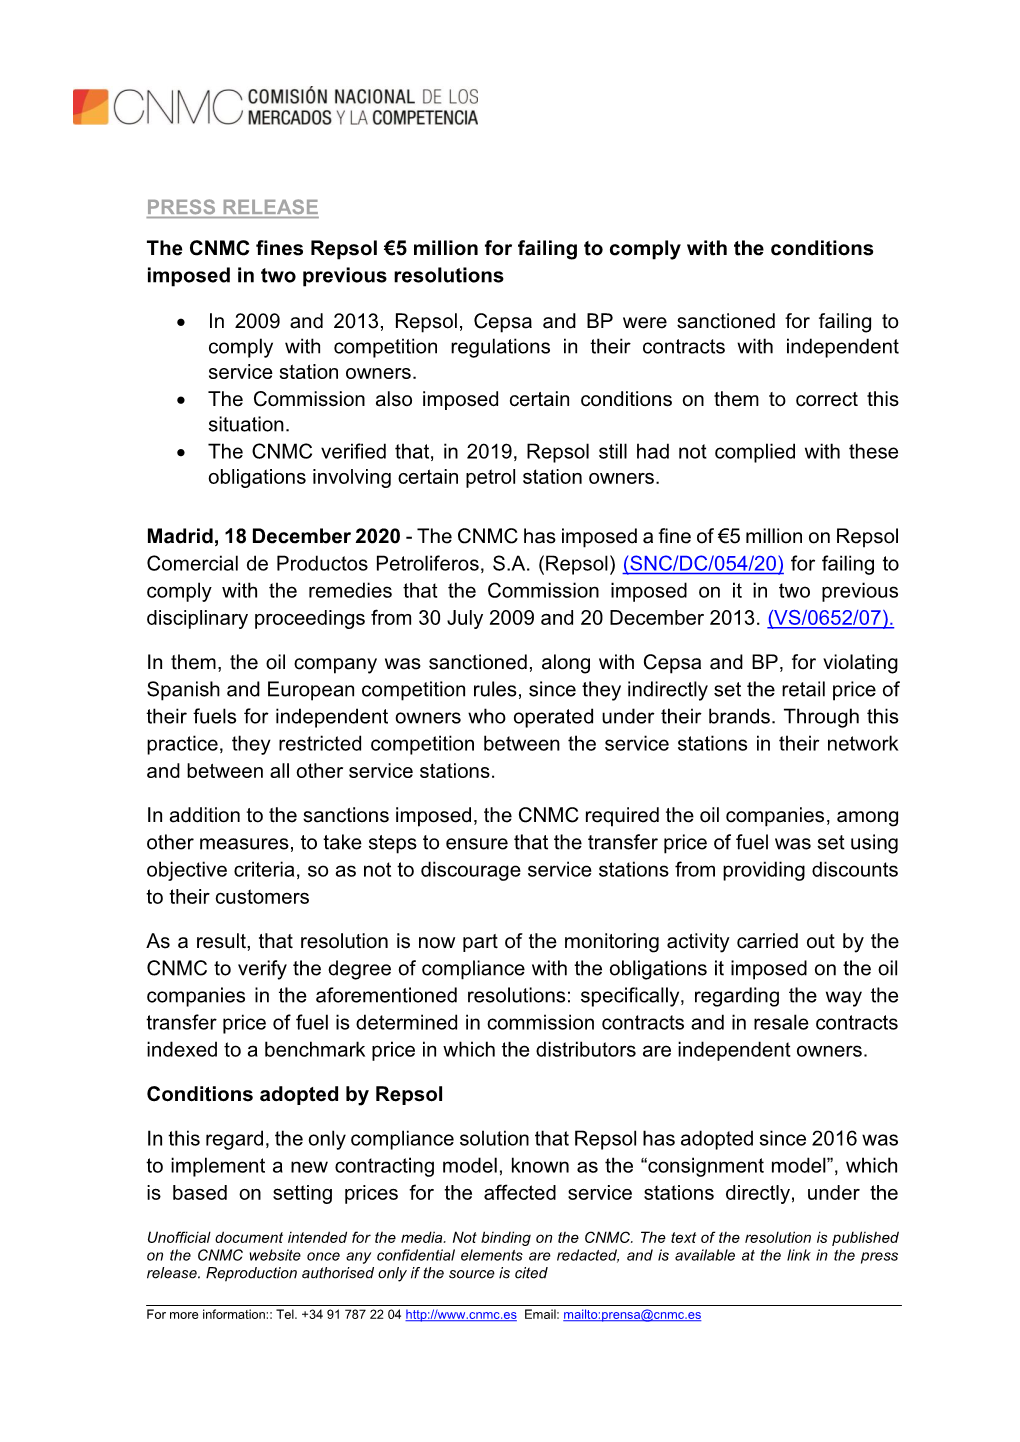 PRESS RELEASE the CNMC Fines Repsol €5 Million for Failing to Comply with the Conditions Imposed in Two Previous Resolutions